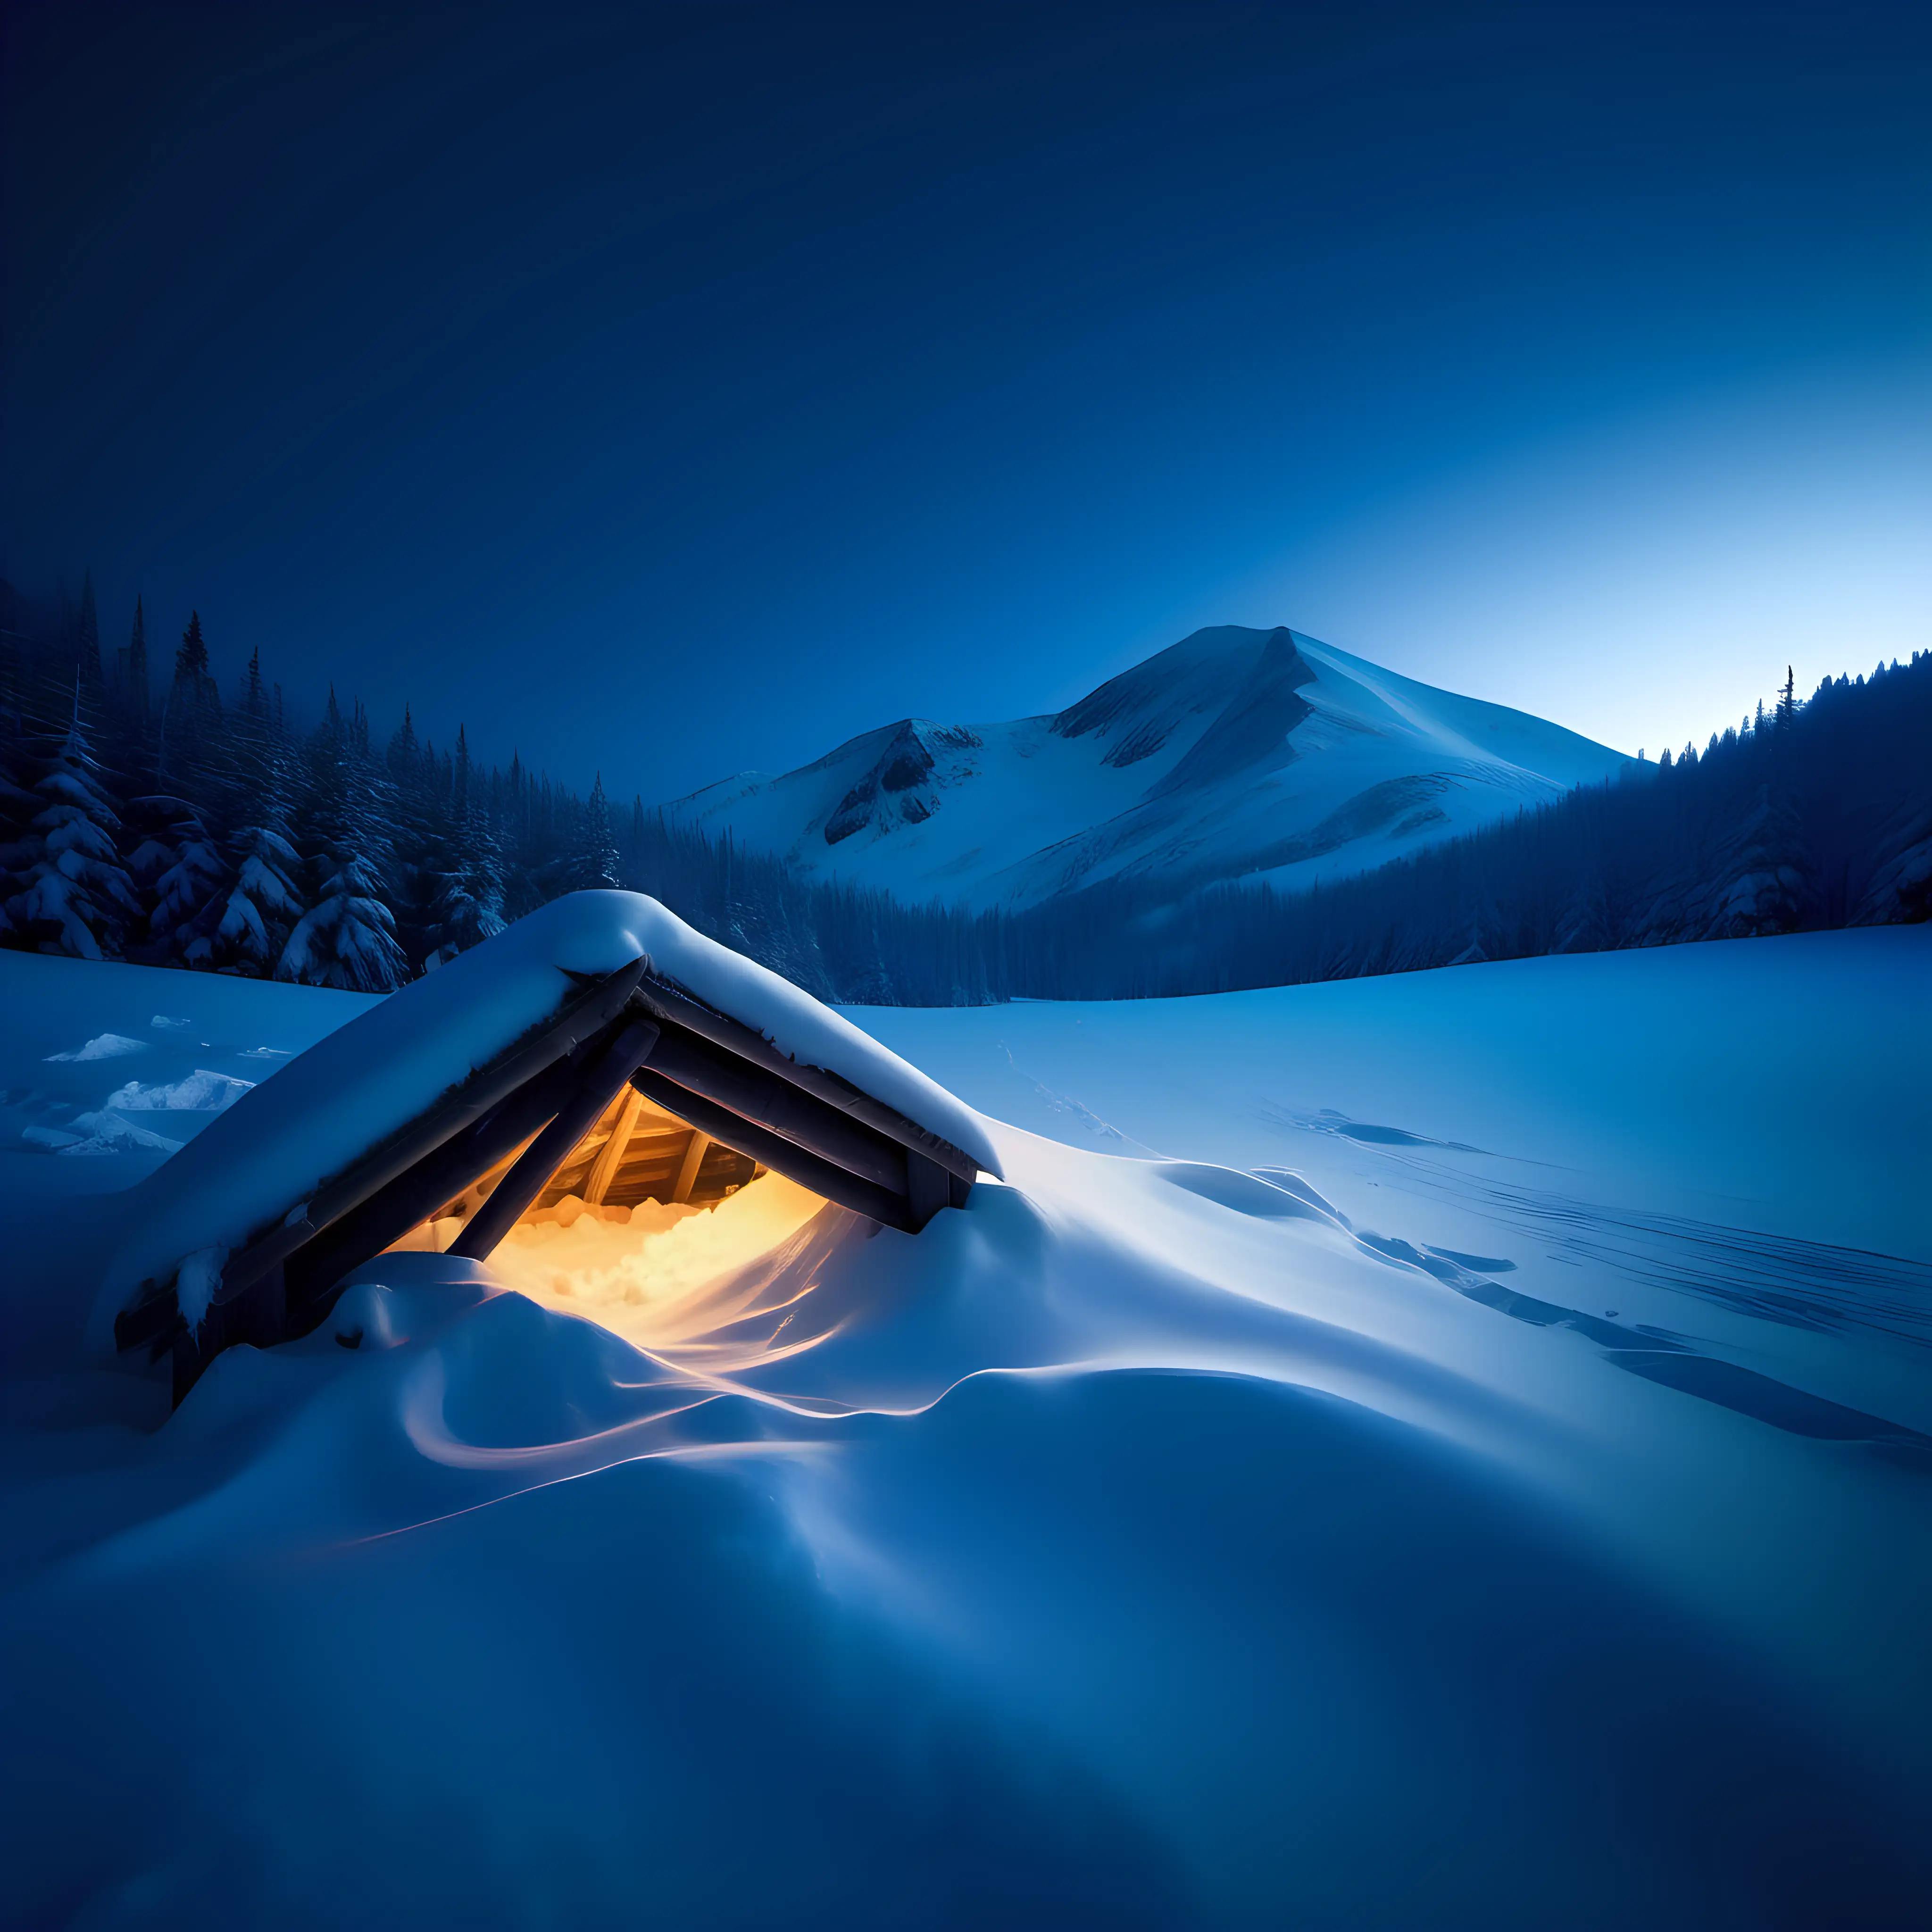 create a windy snowy peak, snow all over, messy snow from a snow shelter digged out, ambient blue hour light